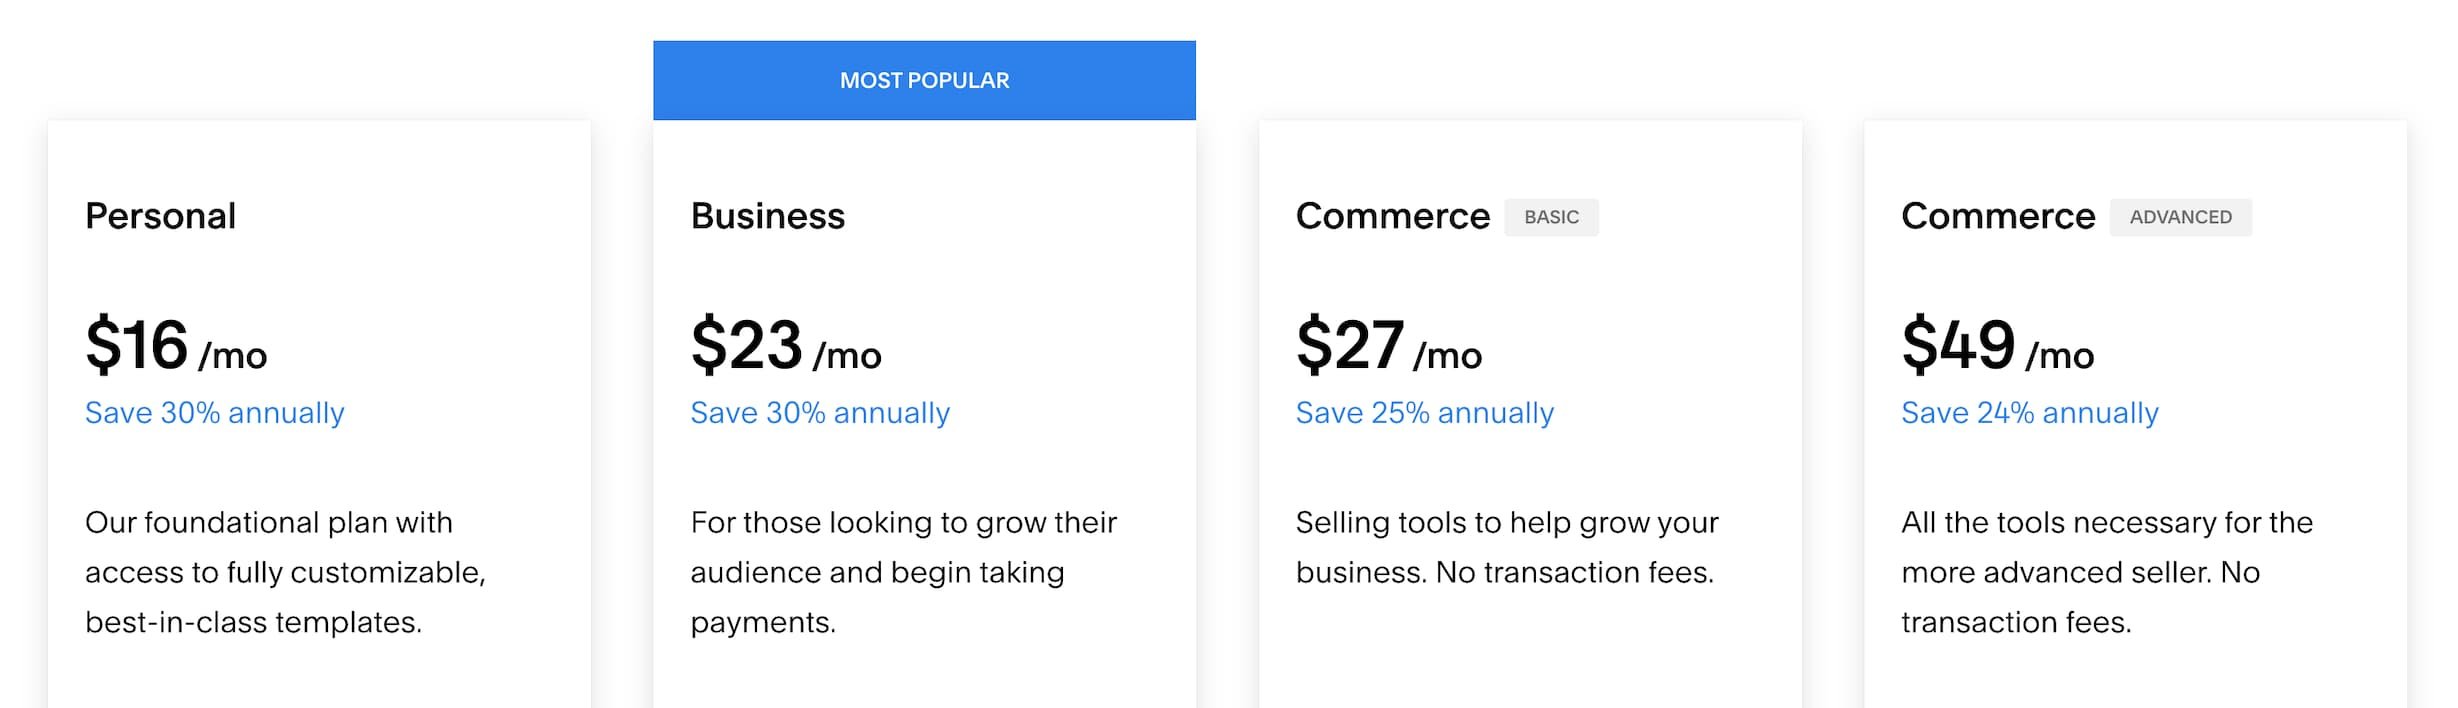 squarespace-pricing-explained-hosting-marketplace-add-ons-collaborada